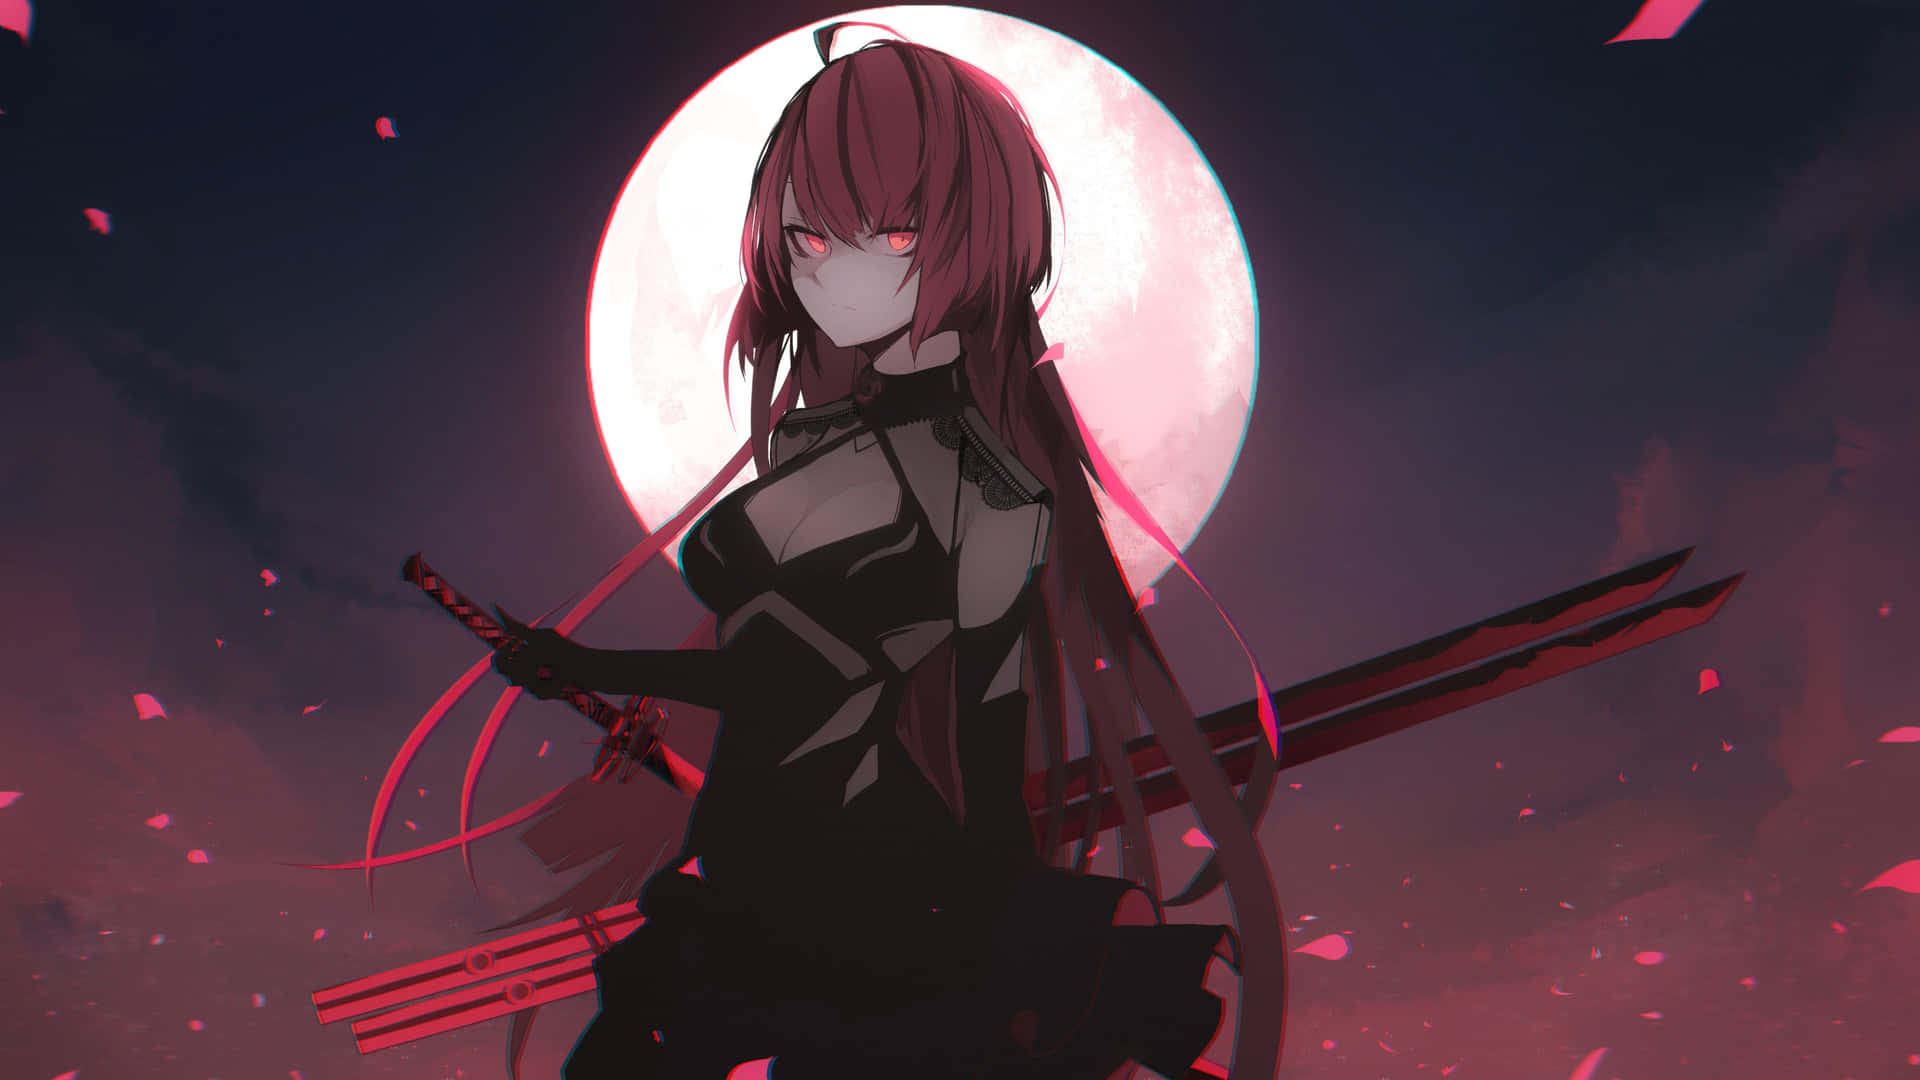 Wallpaper a world full of red moon anime desktop wallpaper hd image  picture background 058c6f  wallpapersmug